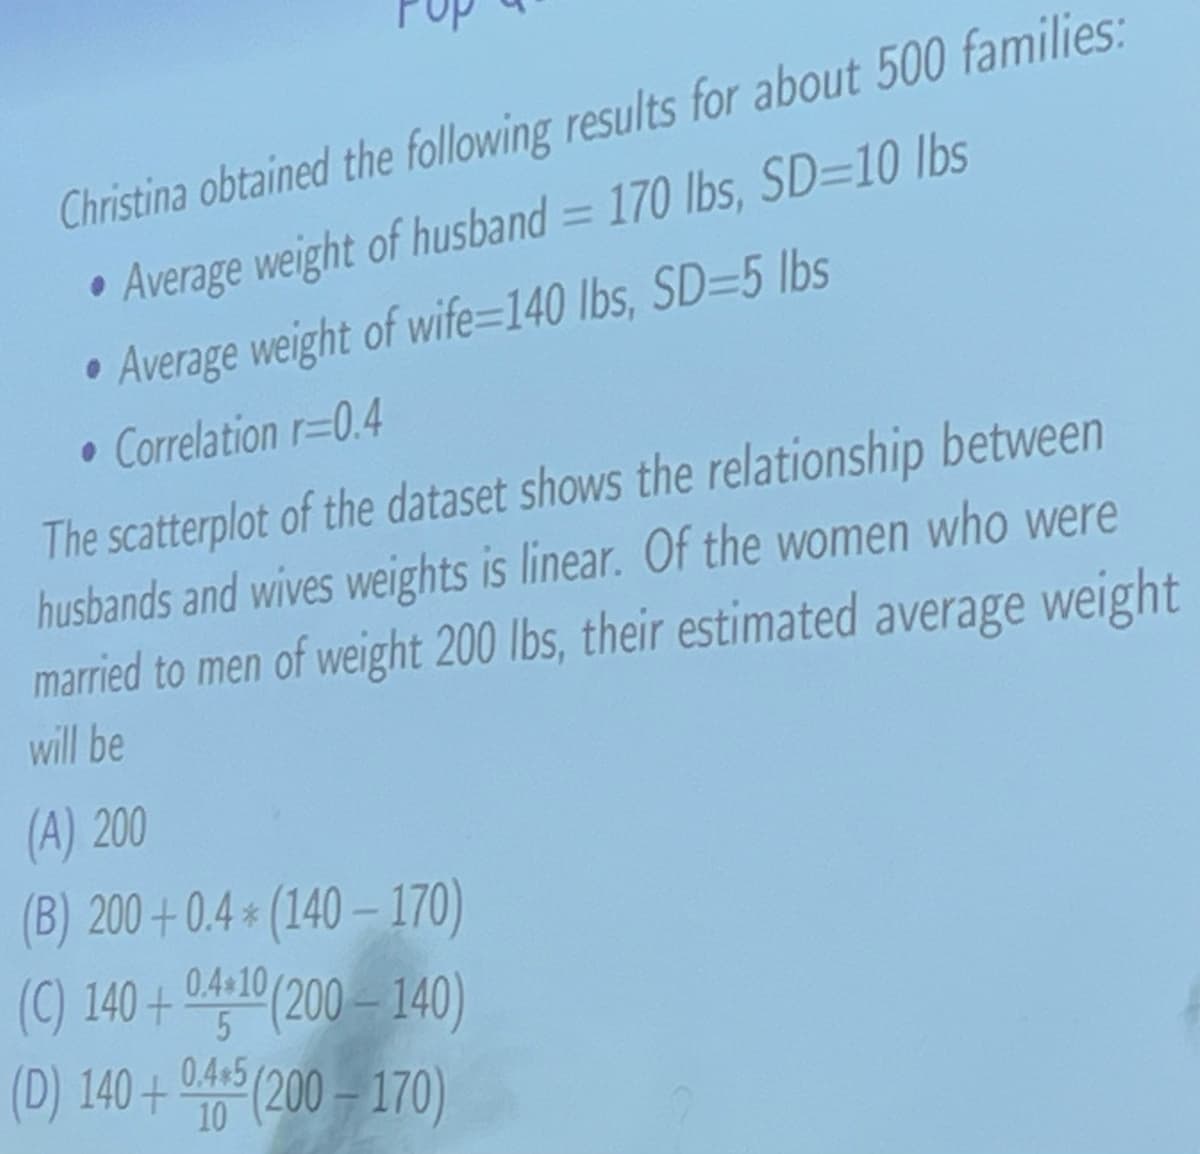 Christina obtained the following results for about 500 families:
Average weight of husband = 170 lbs, SD=10 lbs
Average weight of wife=140 lbs, SD=5 lbs
• Correlation r=0.4
The scatterplot of the dataset shows the relationship between
husbands and wives weights is linear. Of the women who were
married to men of weight 200 lbs, their estimated average weight
will be
(A) 200
(B) 200+0.4* (140-170)
(C) 140+ 0.4*10 (200-140)
(D) 140+0405 (200-170)